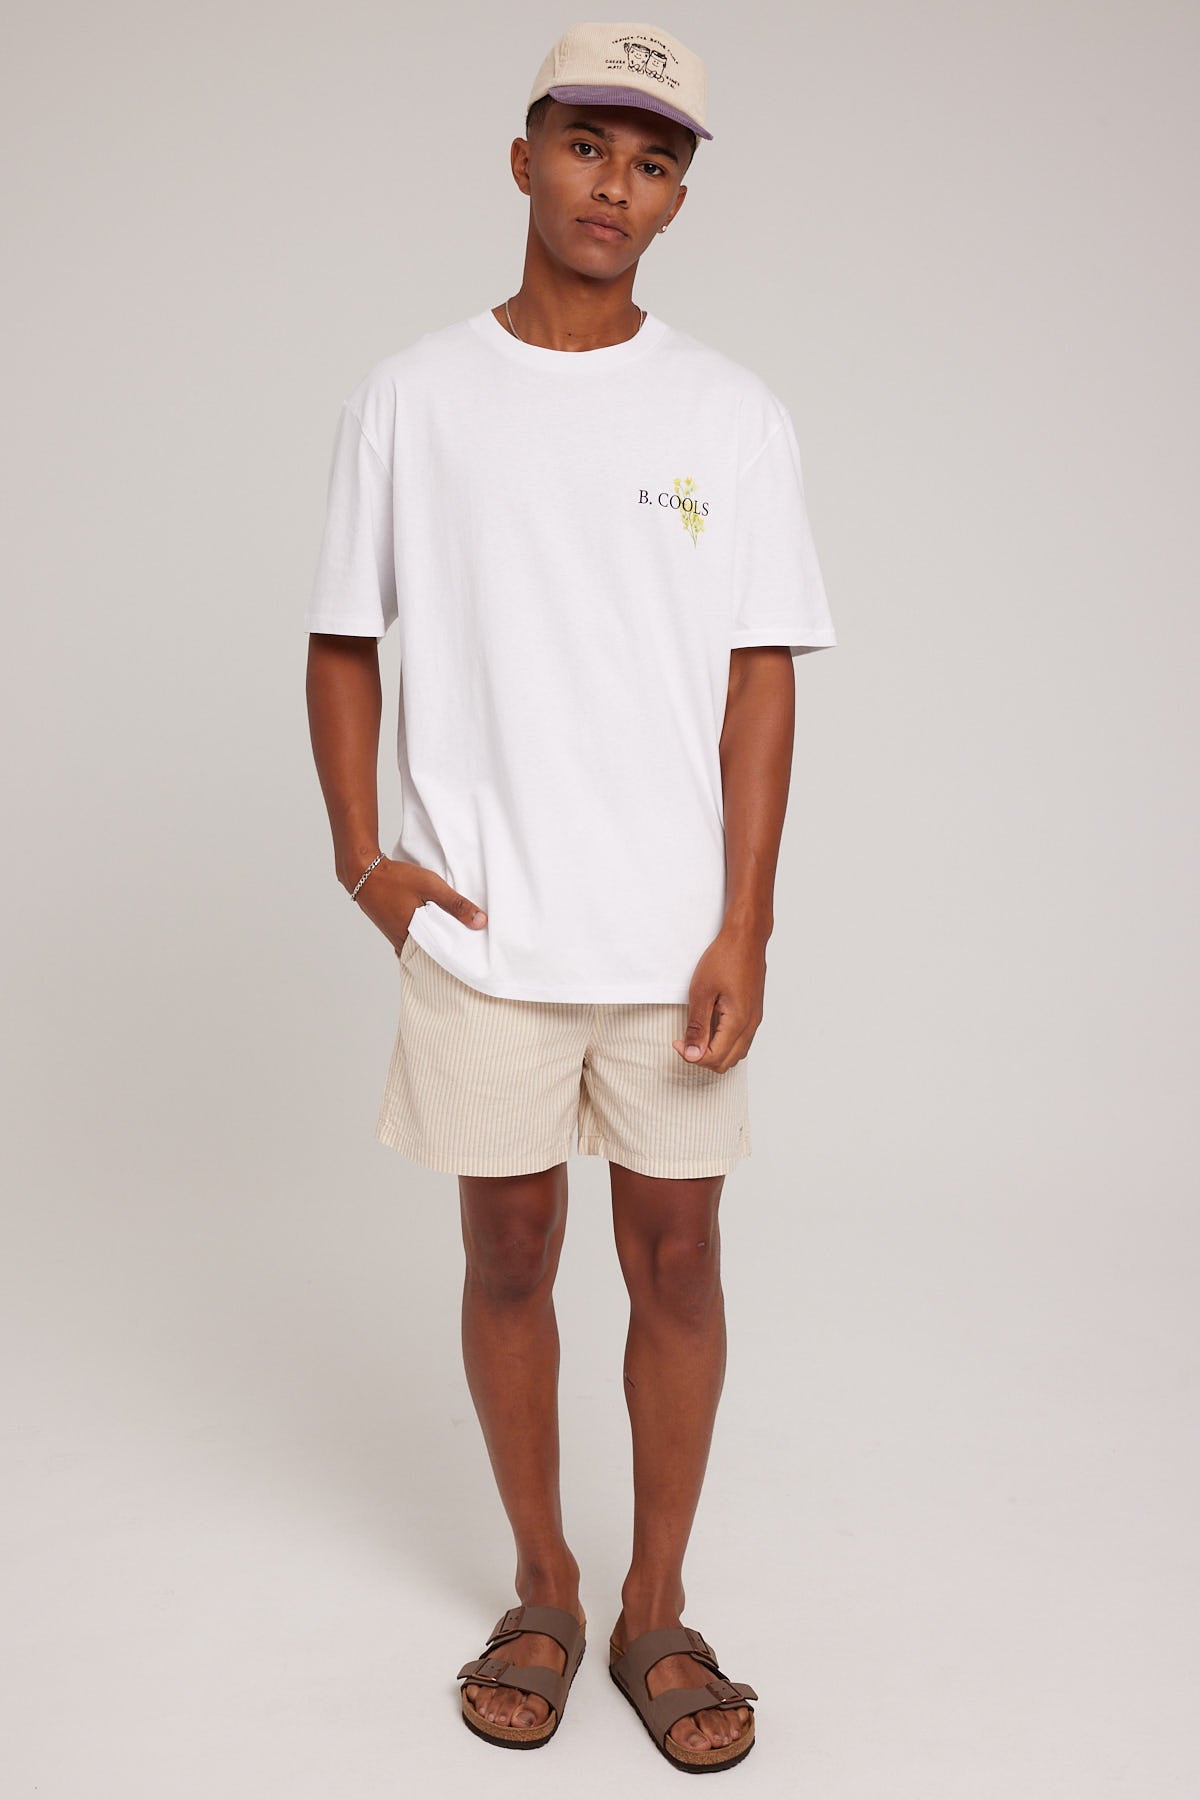 Barney Cools Blossom Tee White